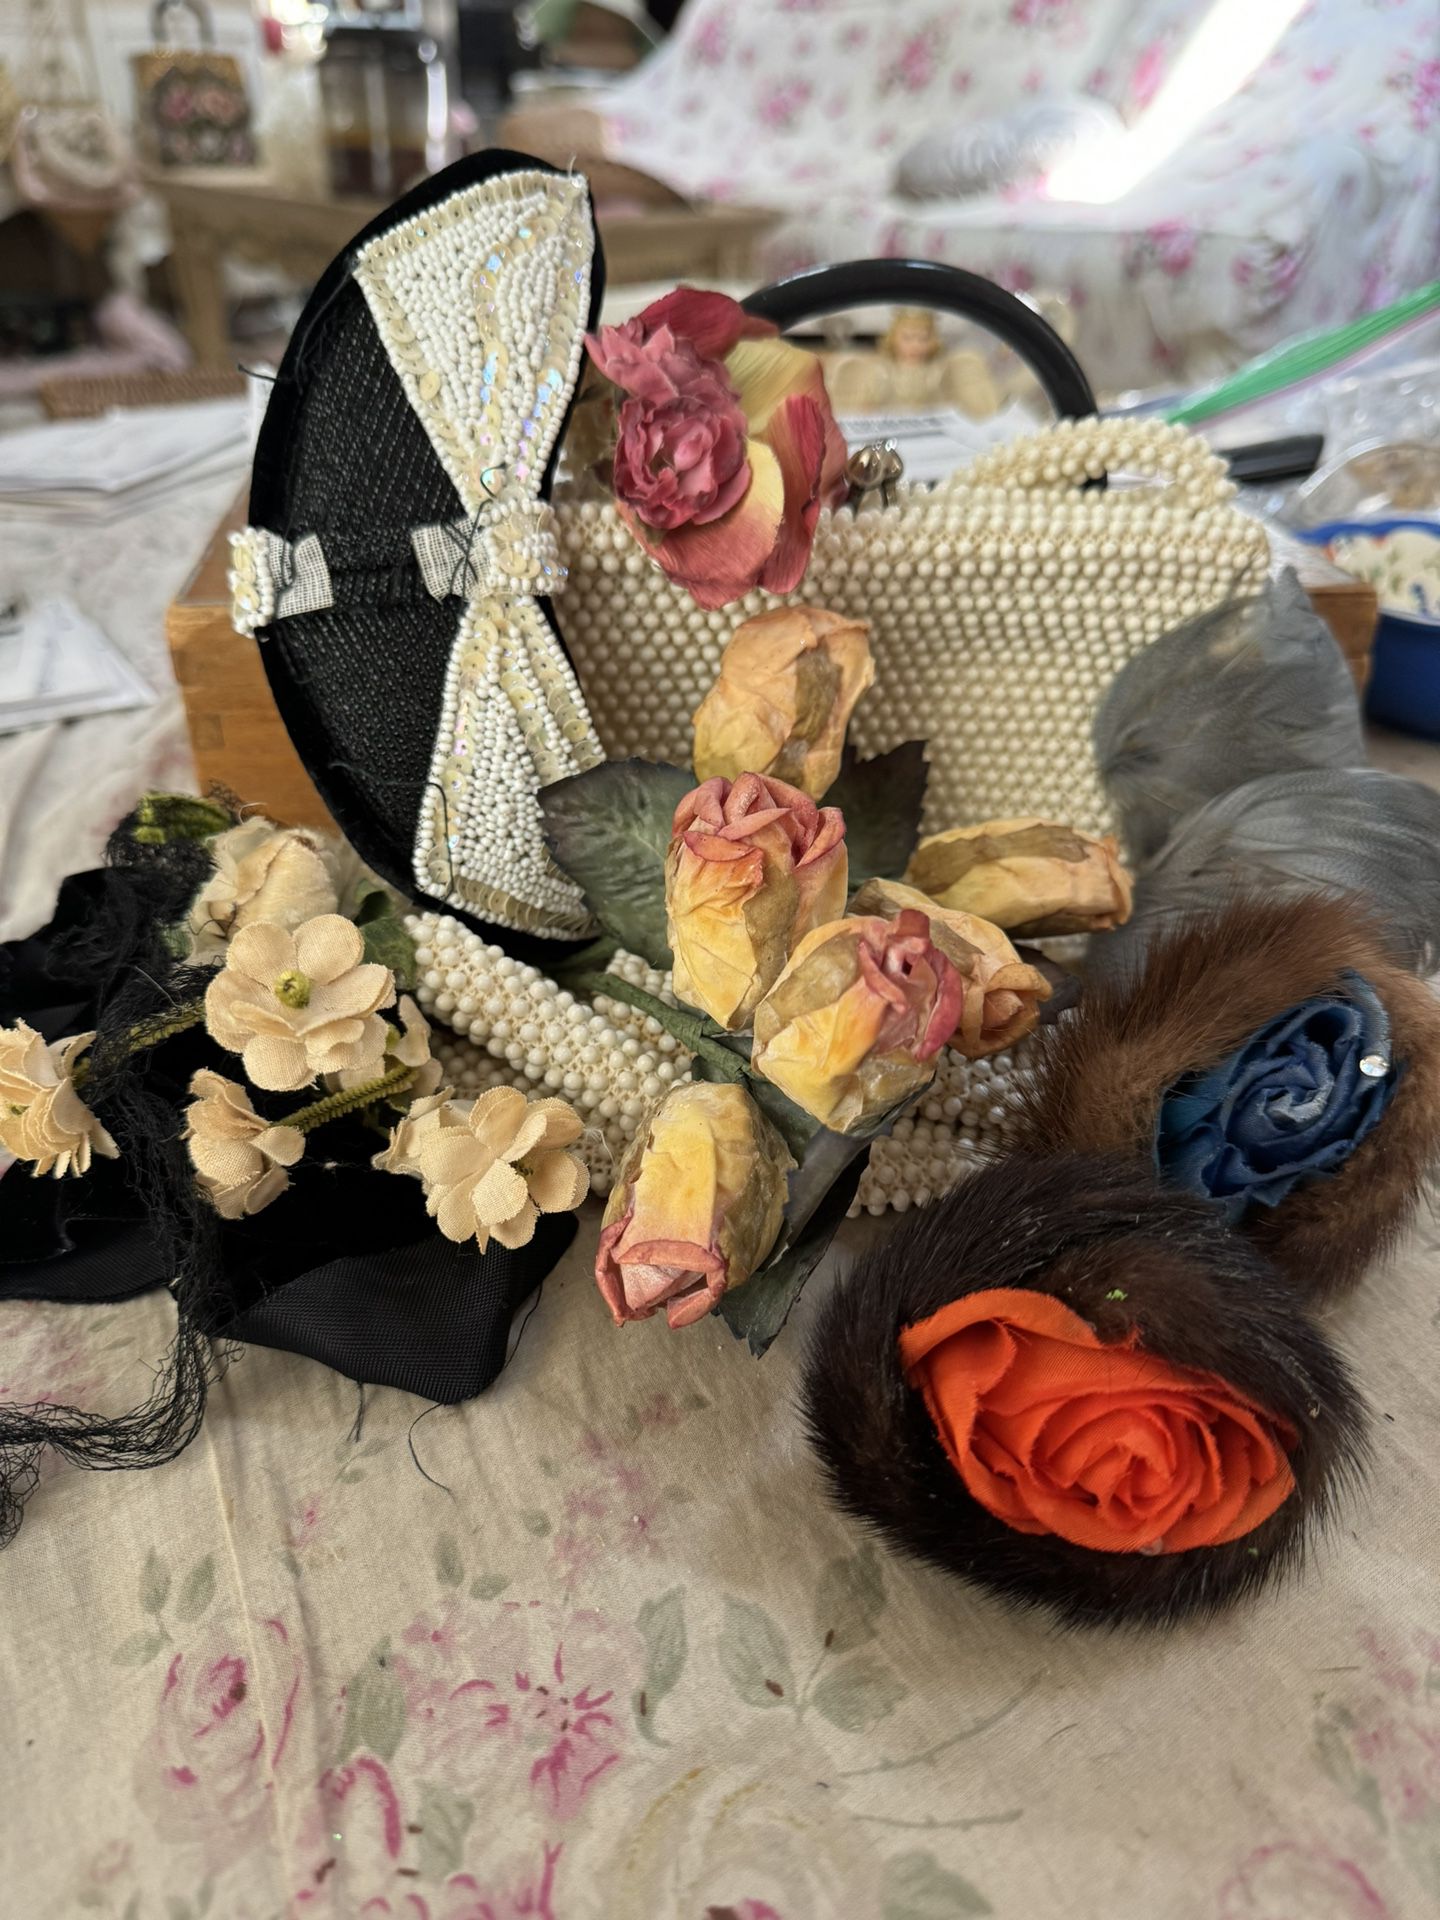 Vintage Lot Of Hat Millinary Flowers Feathers Etc 